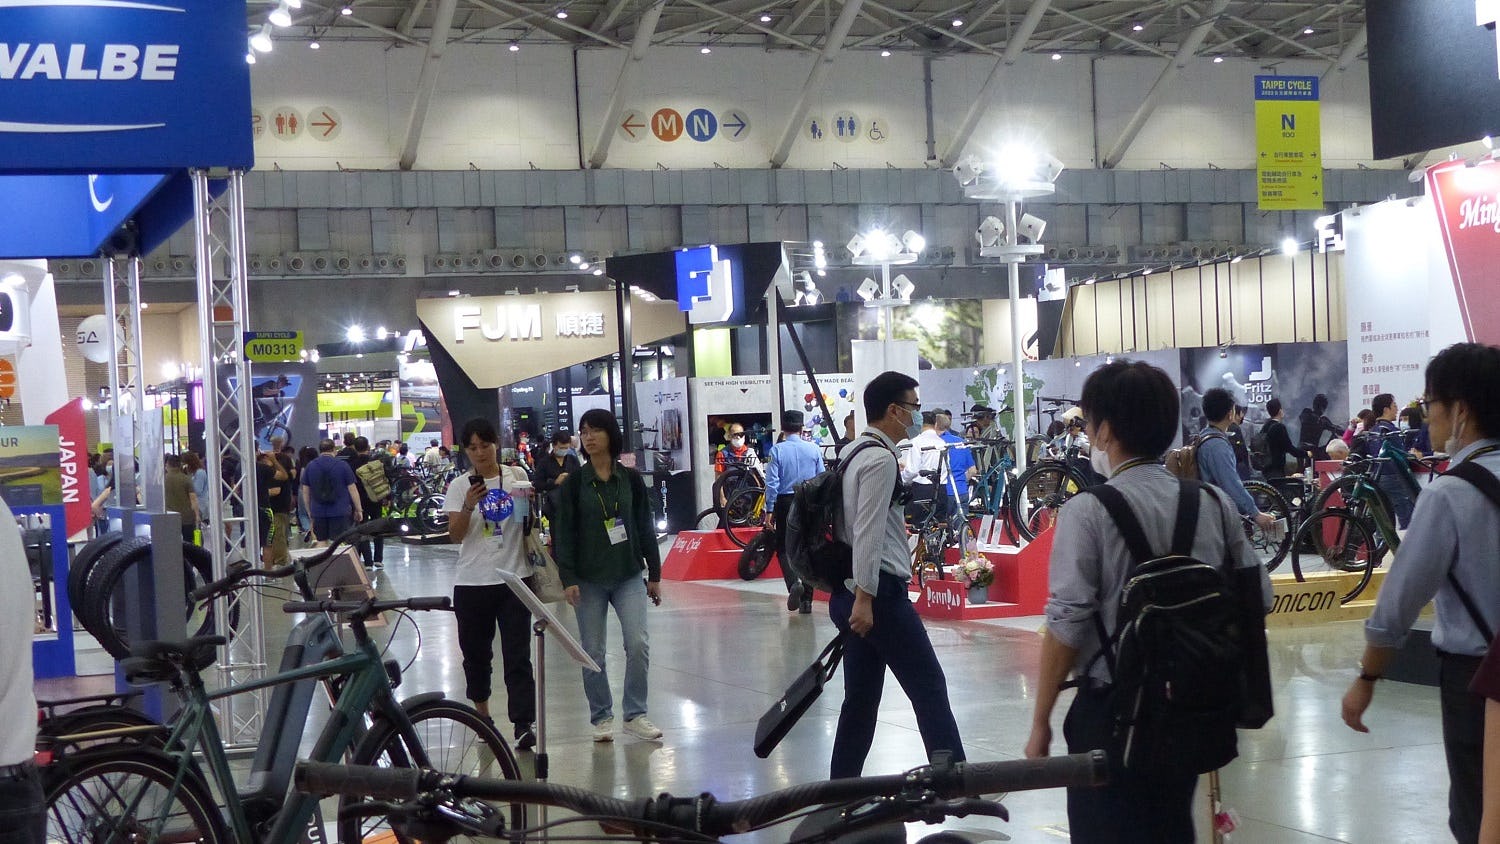 After an involuntary gap of 3 years, the 2023 edition of Taipei Cycle is a vibrant trade event again. – Photo Bike Europe